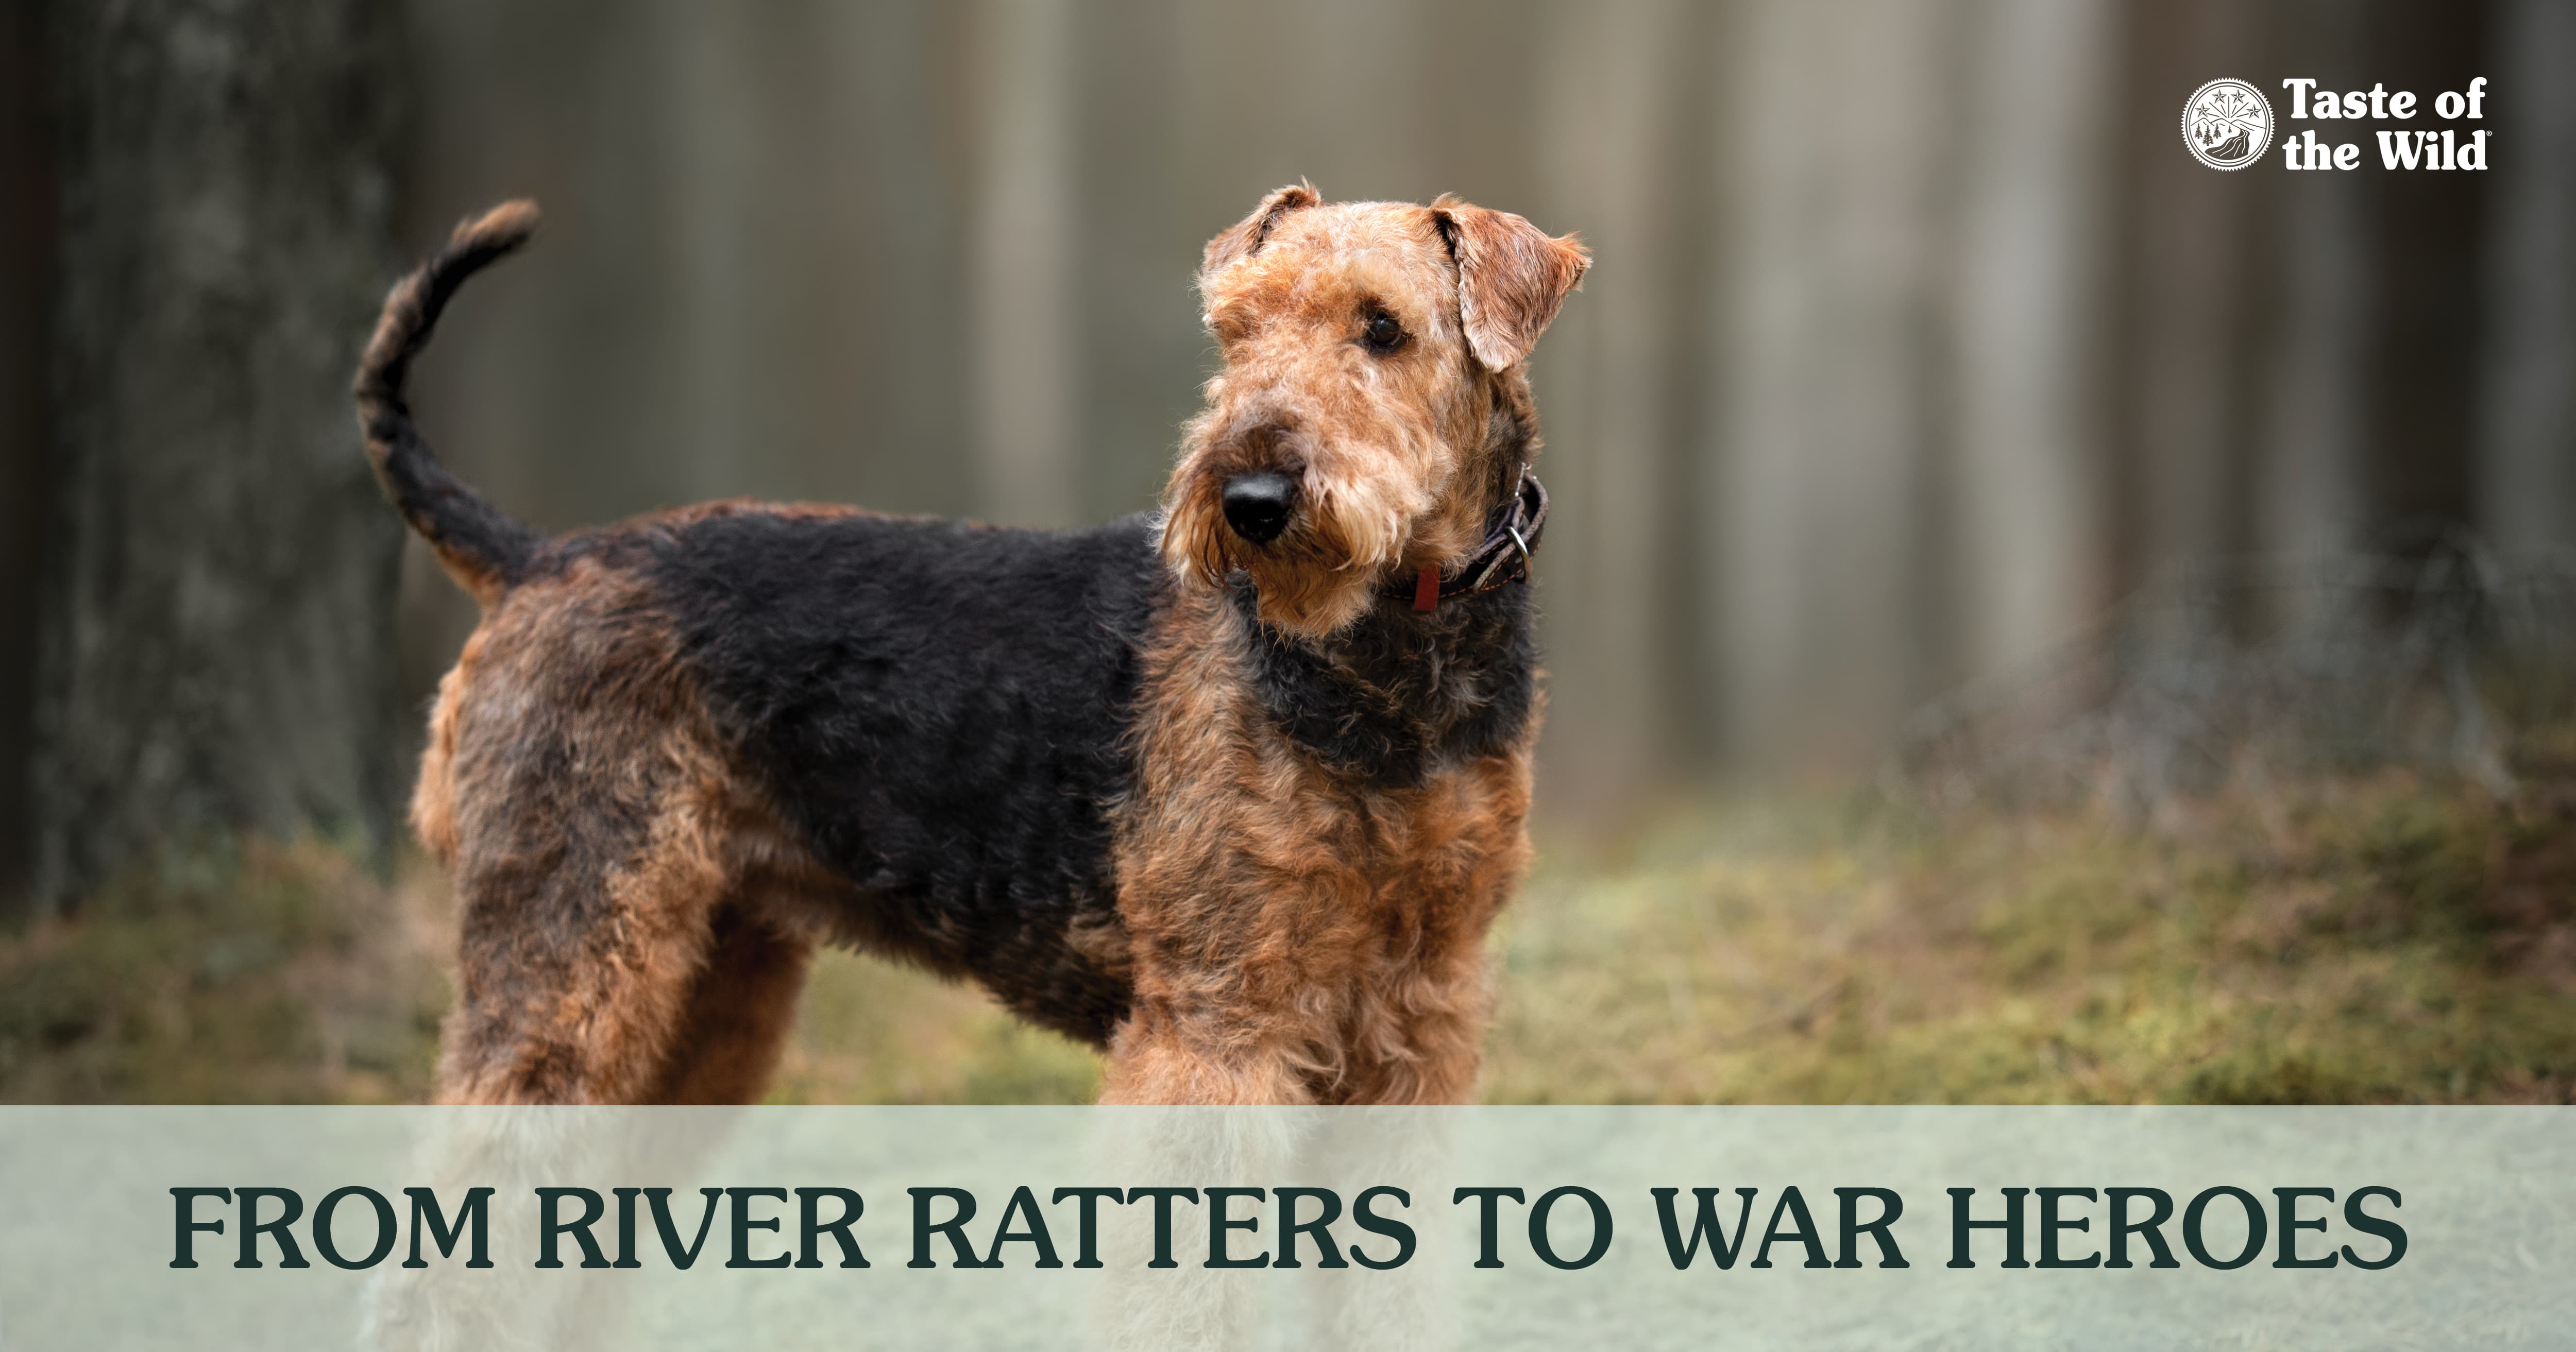 A black and tan Airedale terrier standing in the woods.